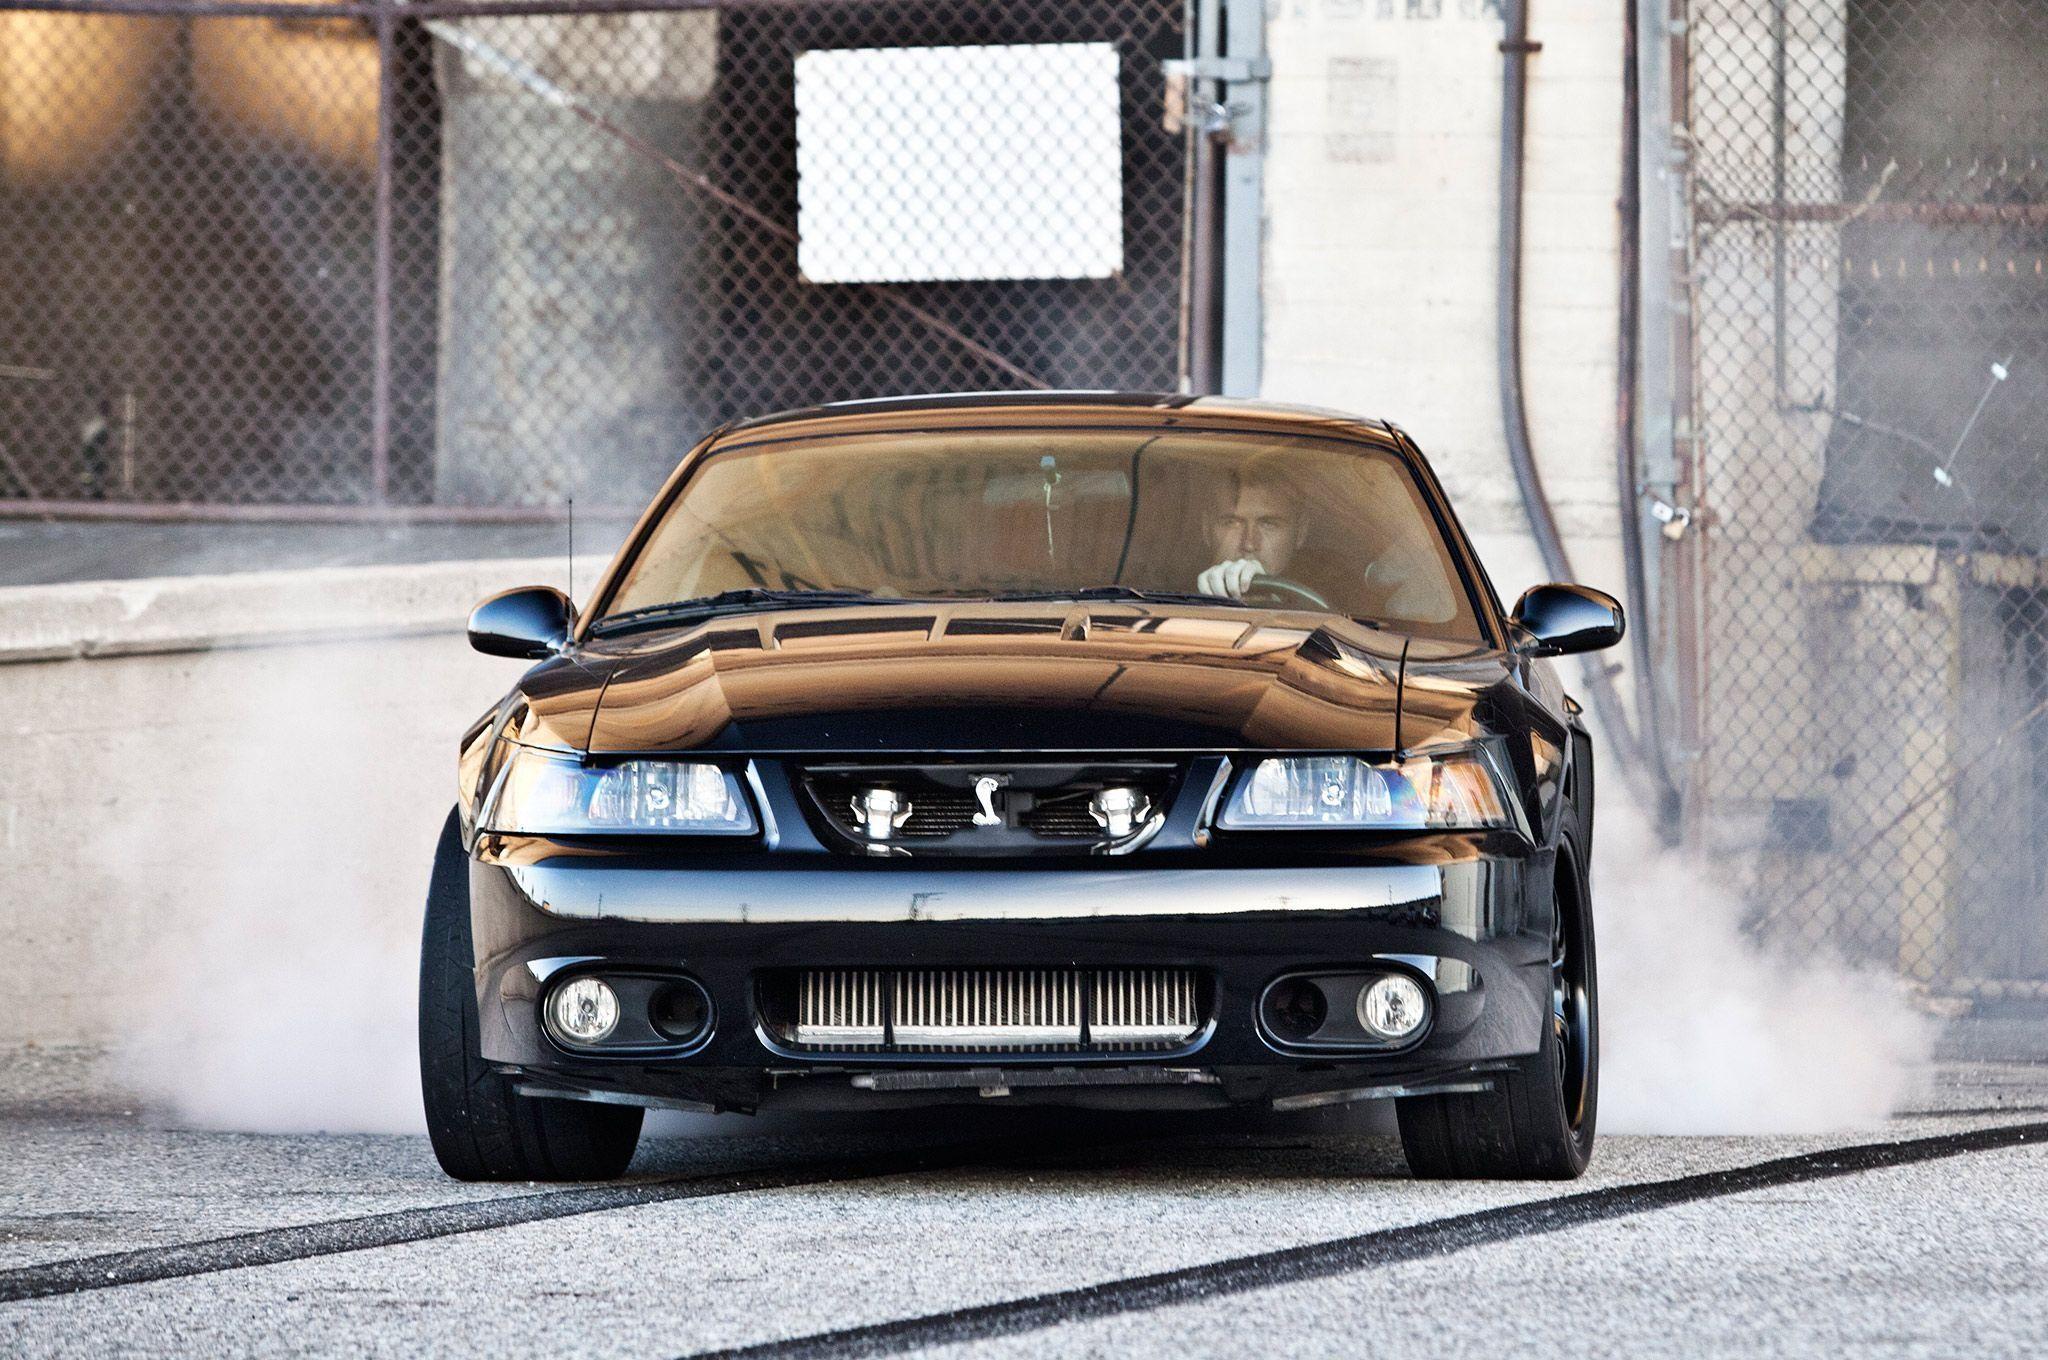 ford mustang cobra terminator mint condition 6750 miles